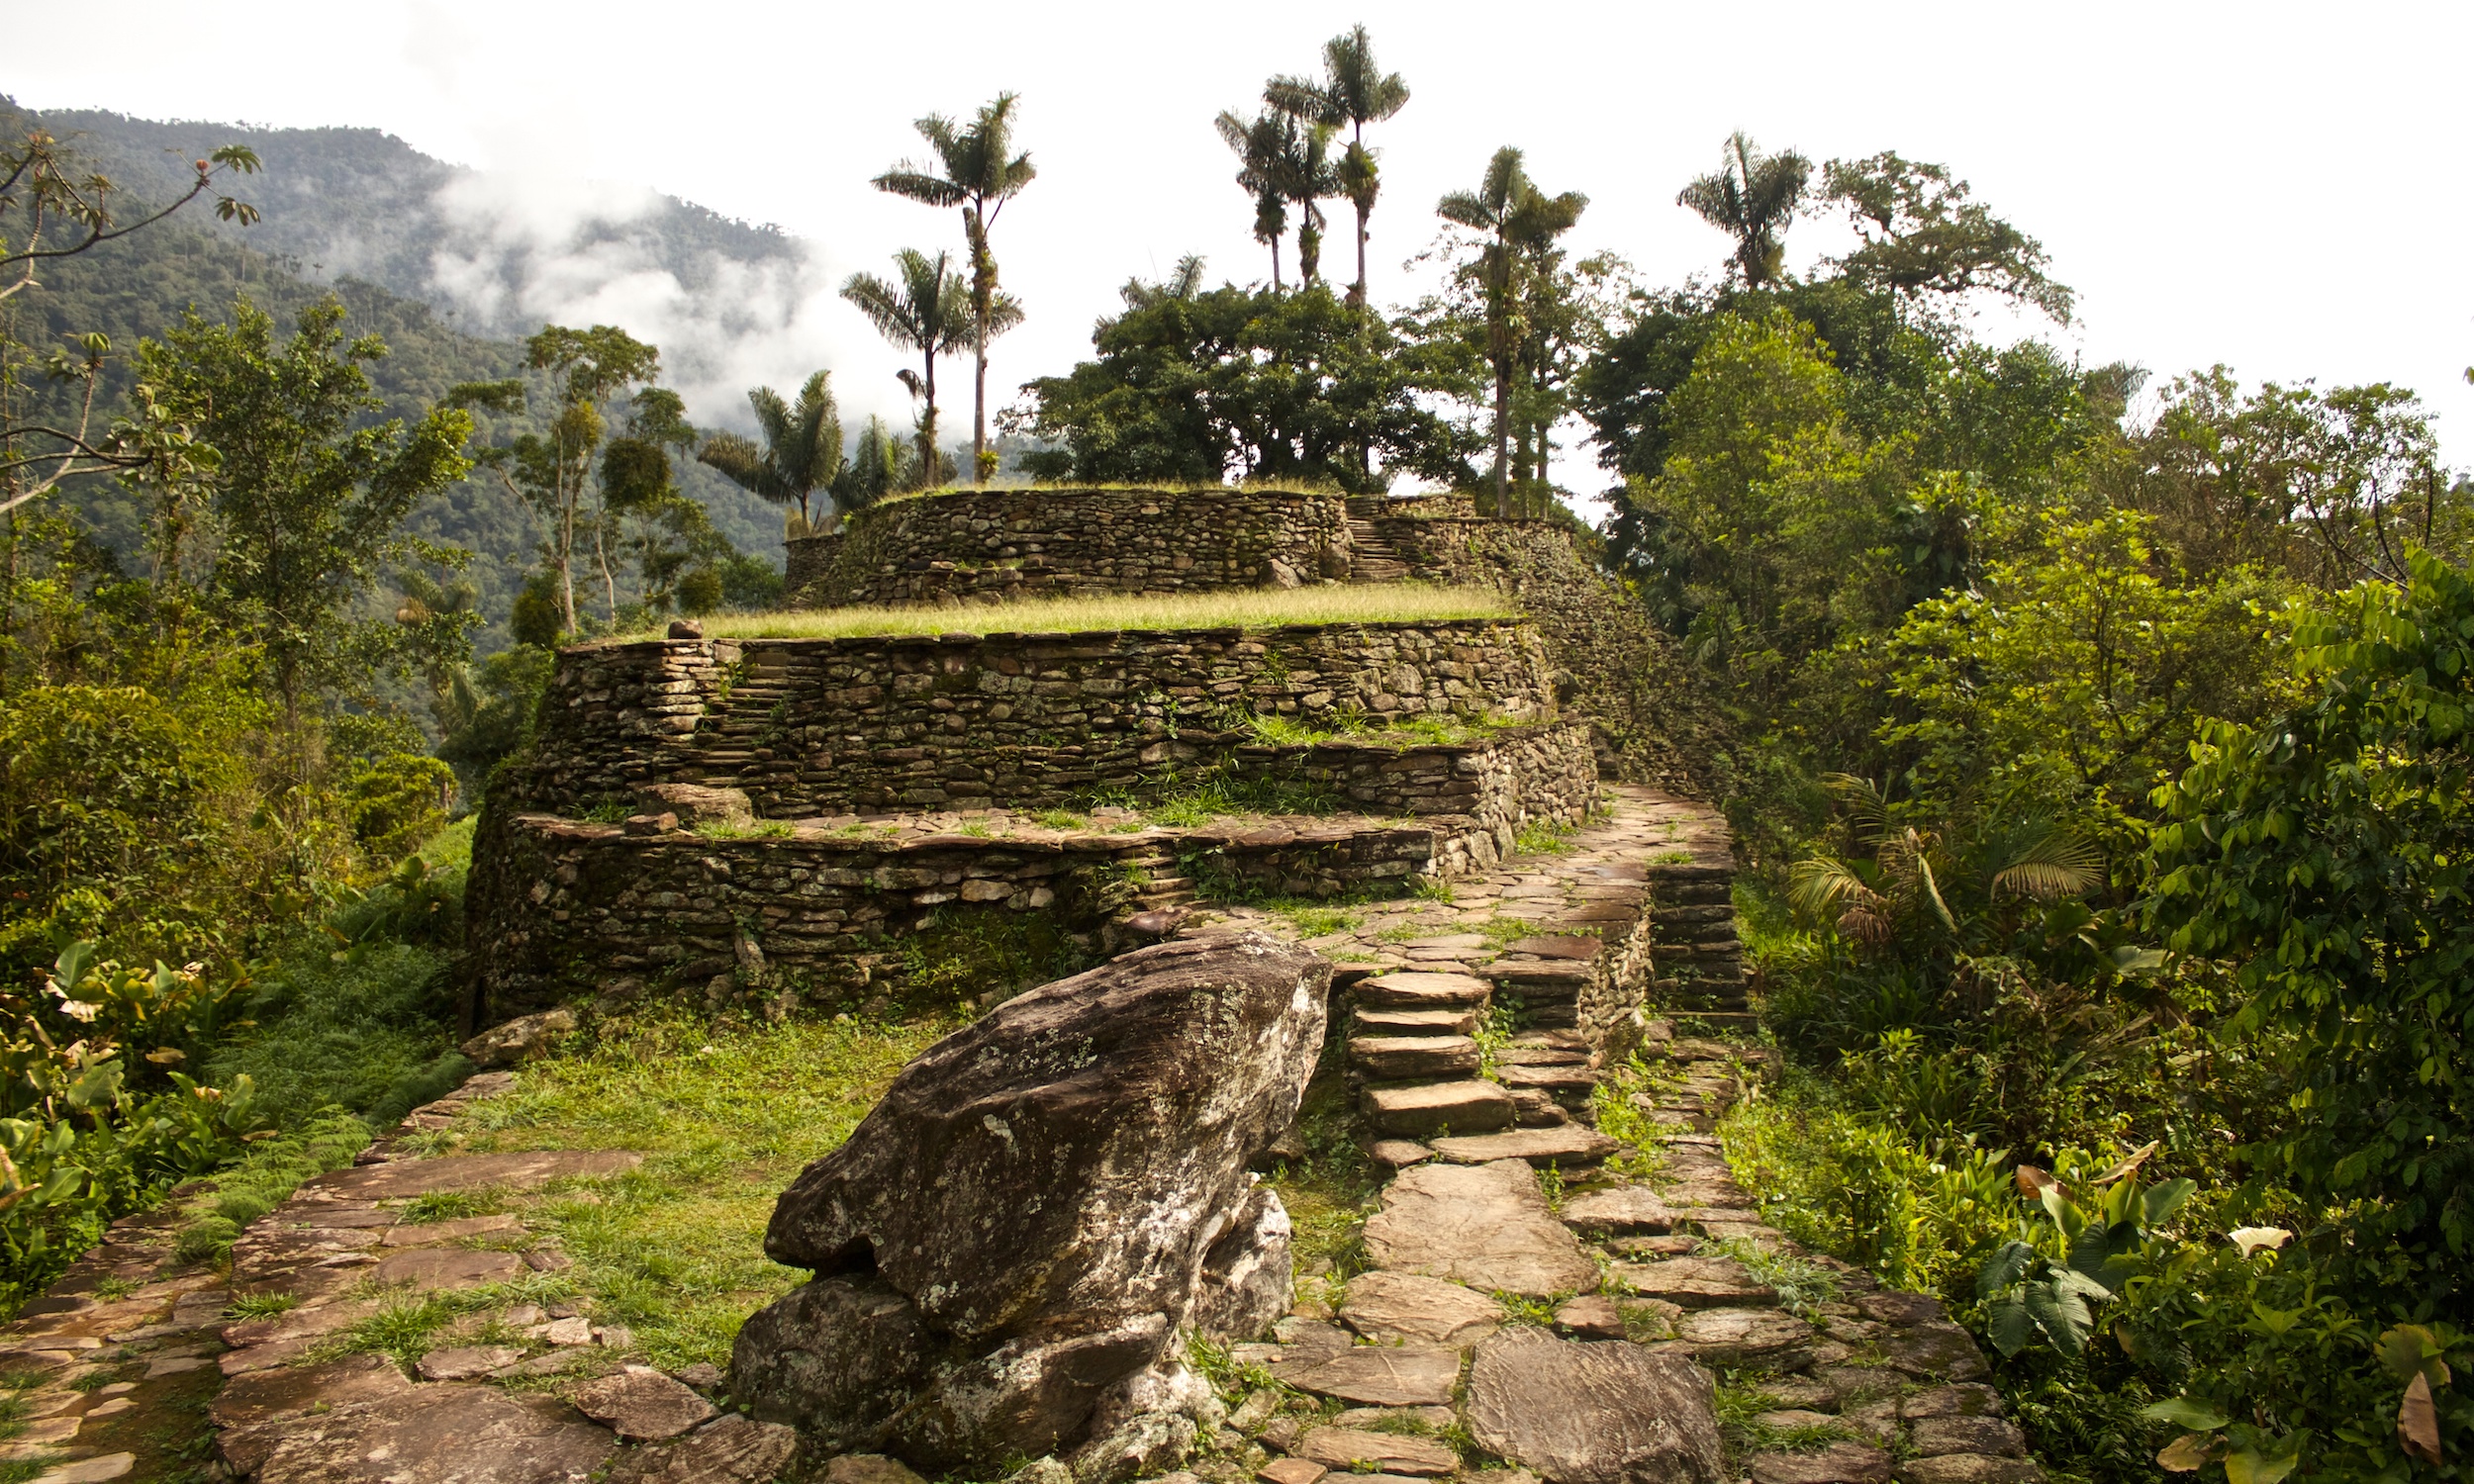 Plan your trip to Colombia and get off the beaten track.